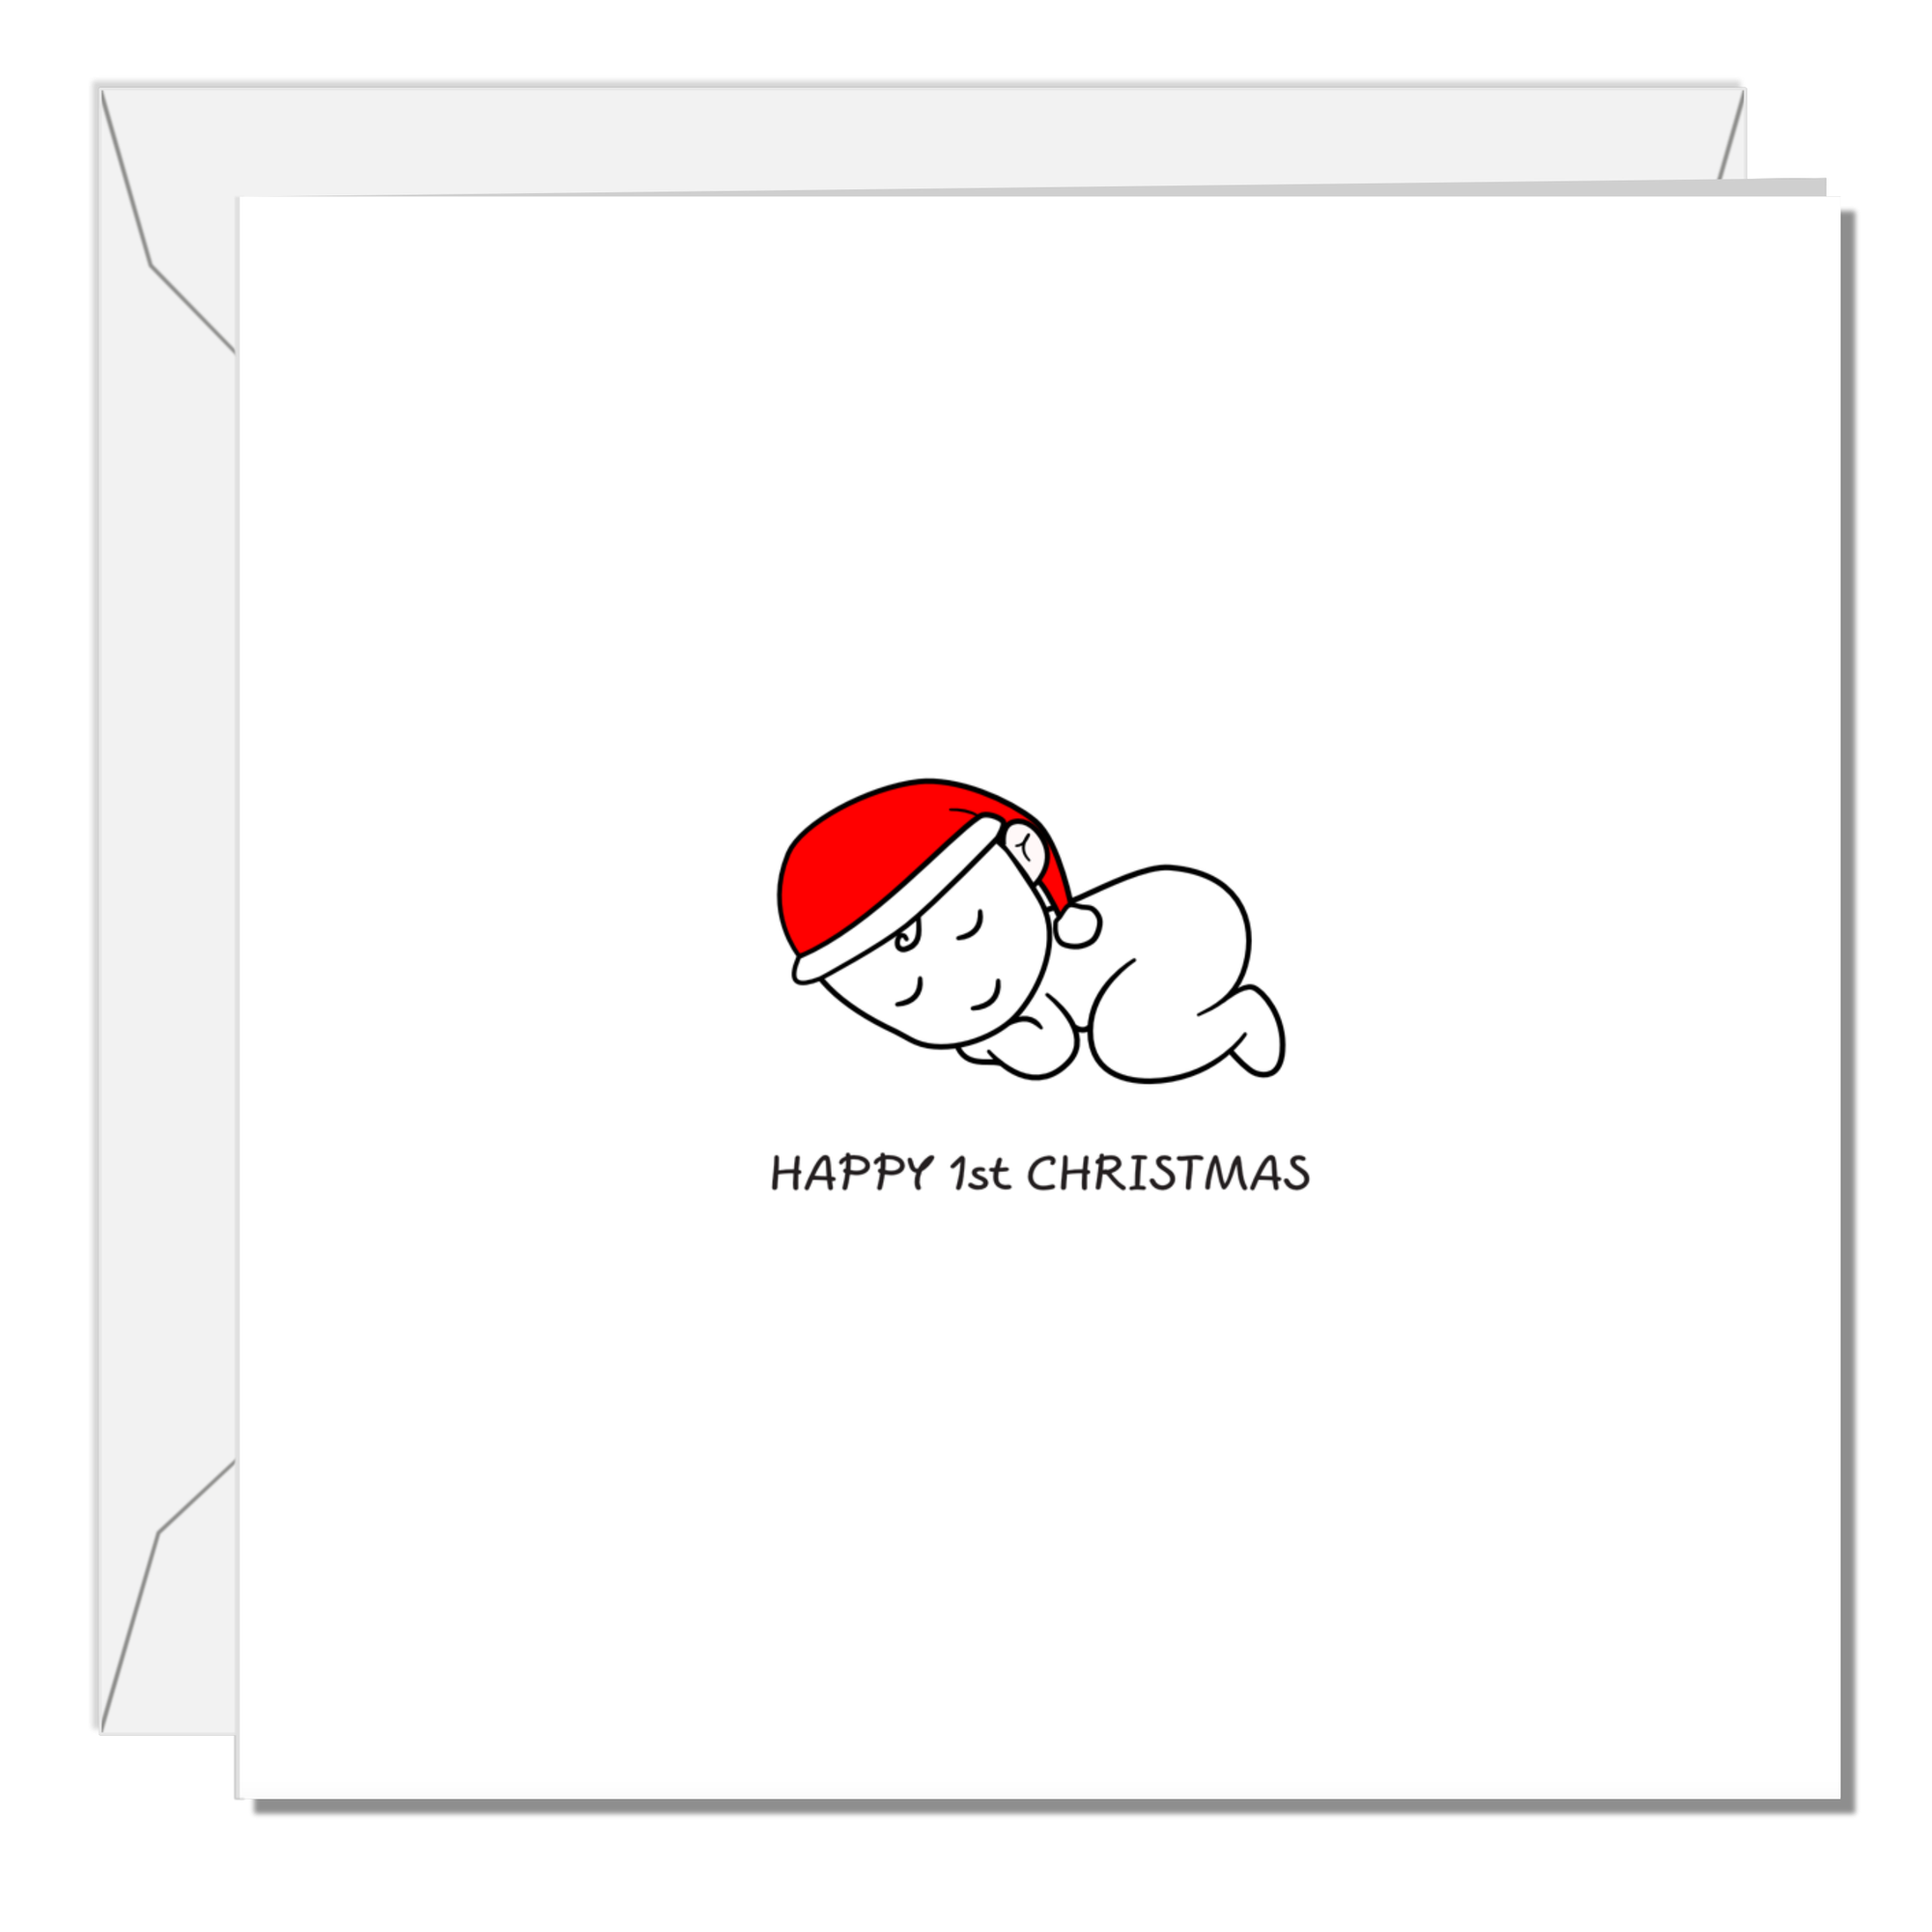 1st Birthday Christmas Card for Baby - Cute Sleeping Baby Wearing a Red Santa Claus Hat - Happy First Xmas